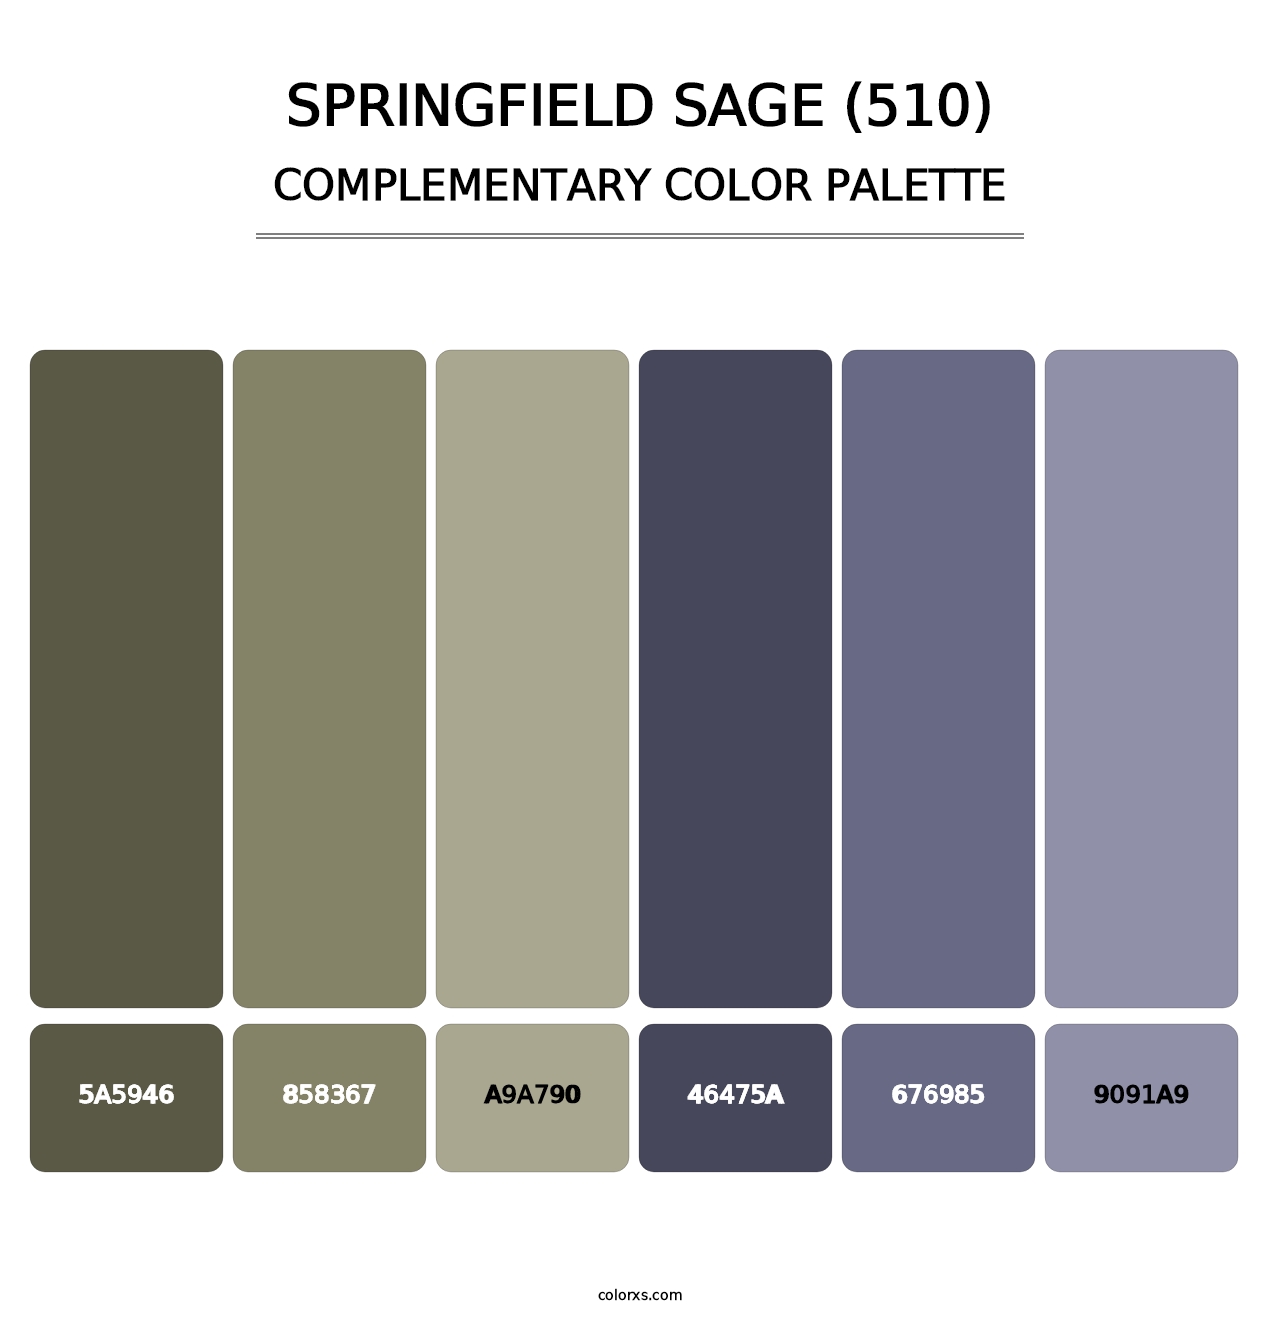 Springfield Sage (510) - Complementary Color Palette